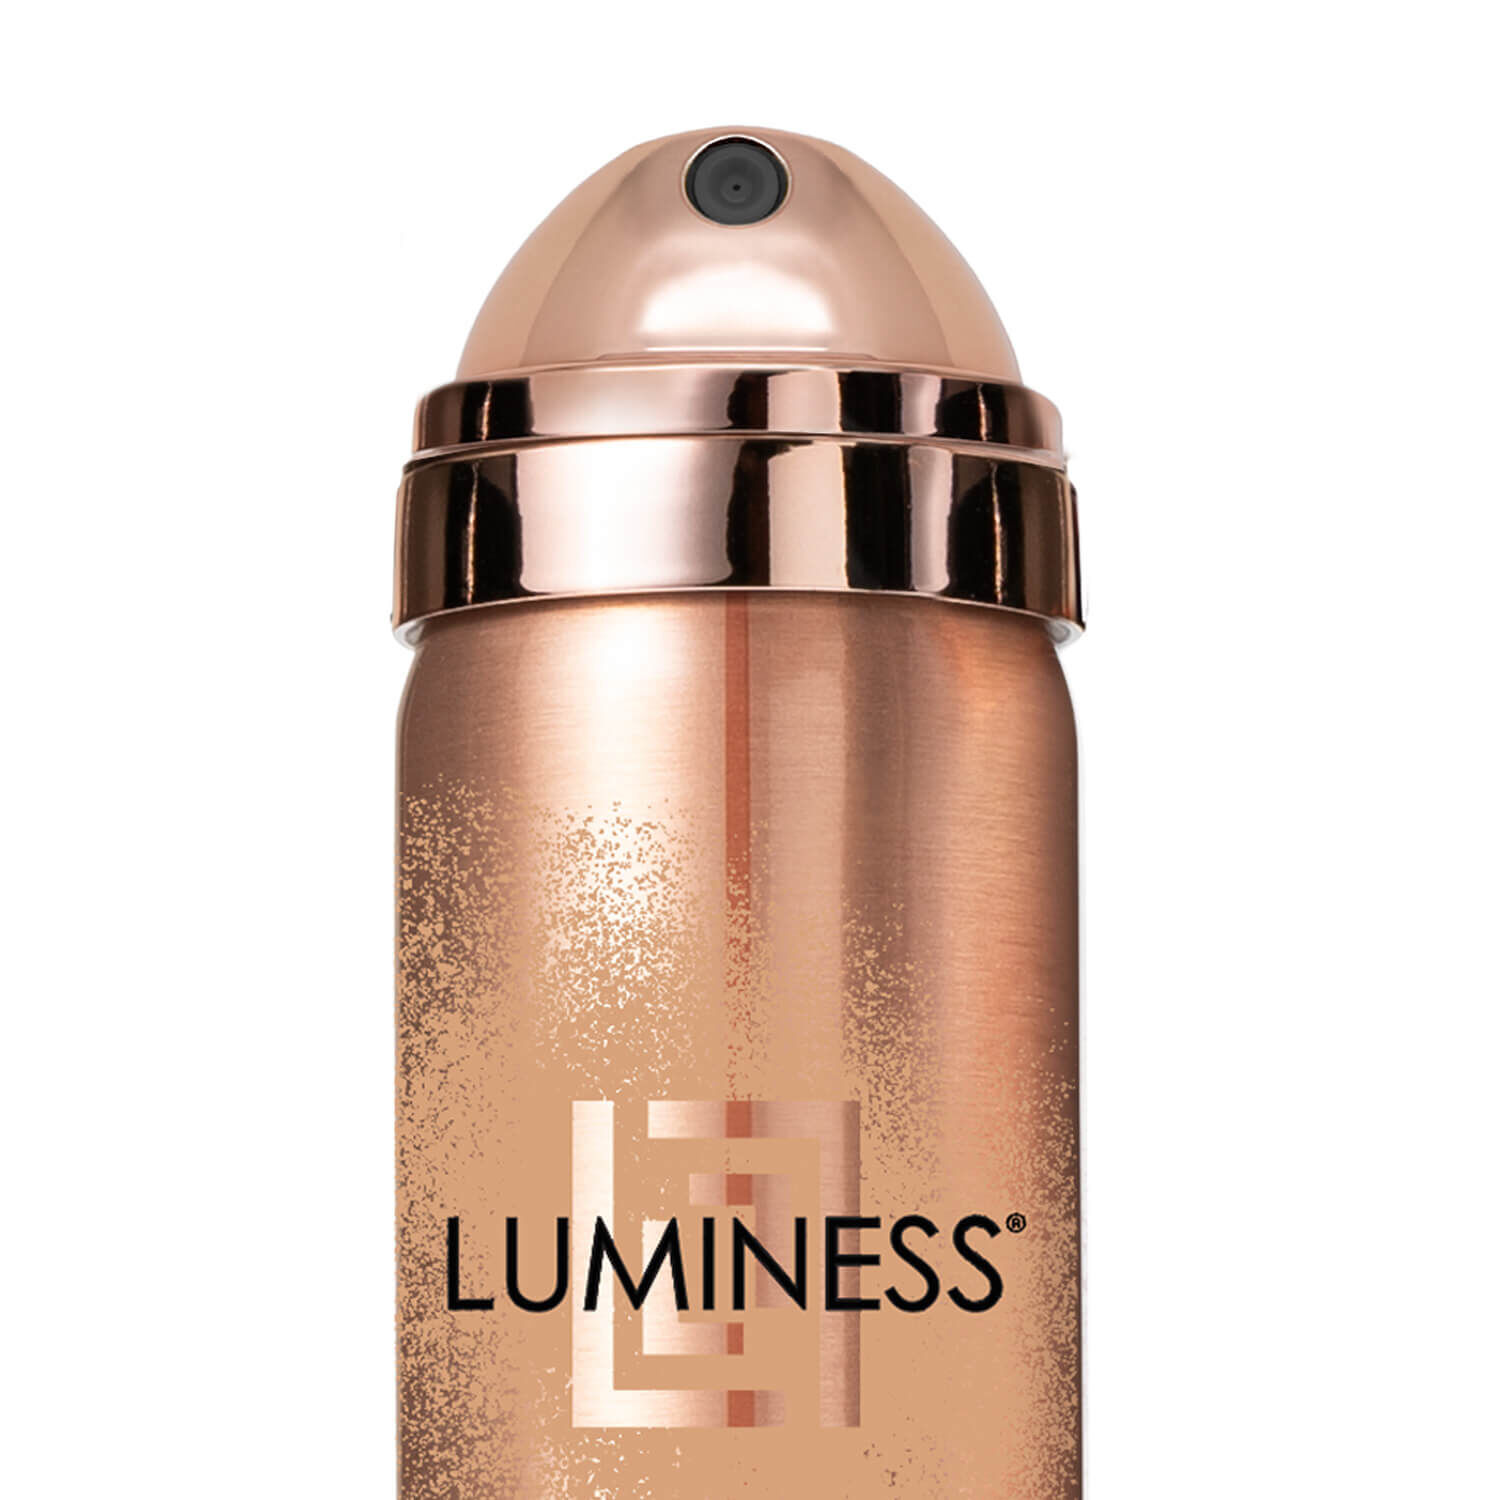  Luminess Air Airbrush Makeup Starter Kit, Silk 4-in-1 Airbrush  Foundation, Tan, 0.5 Oz, 4 Count : Beauty & Personal Care